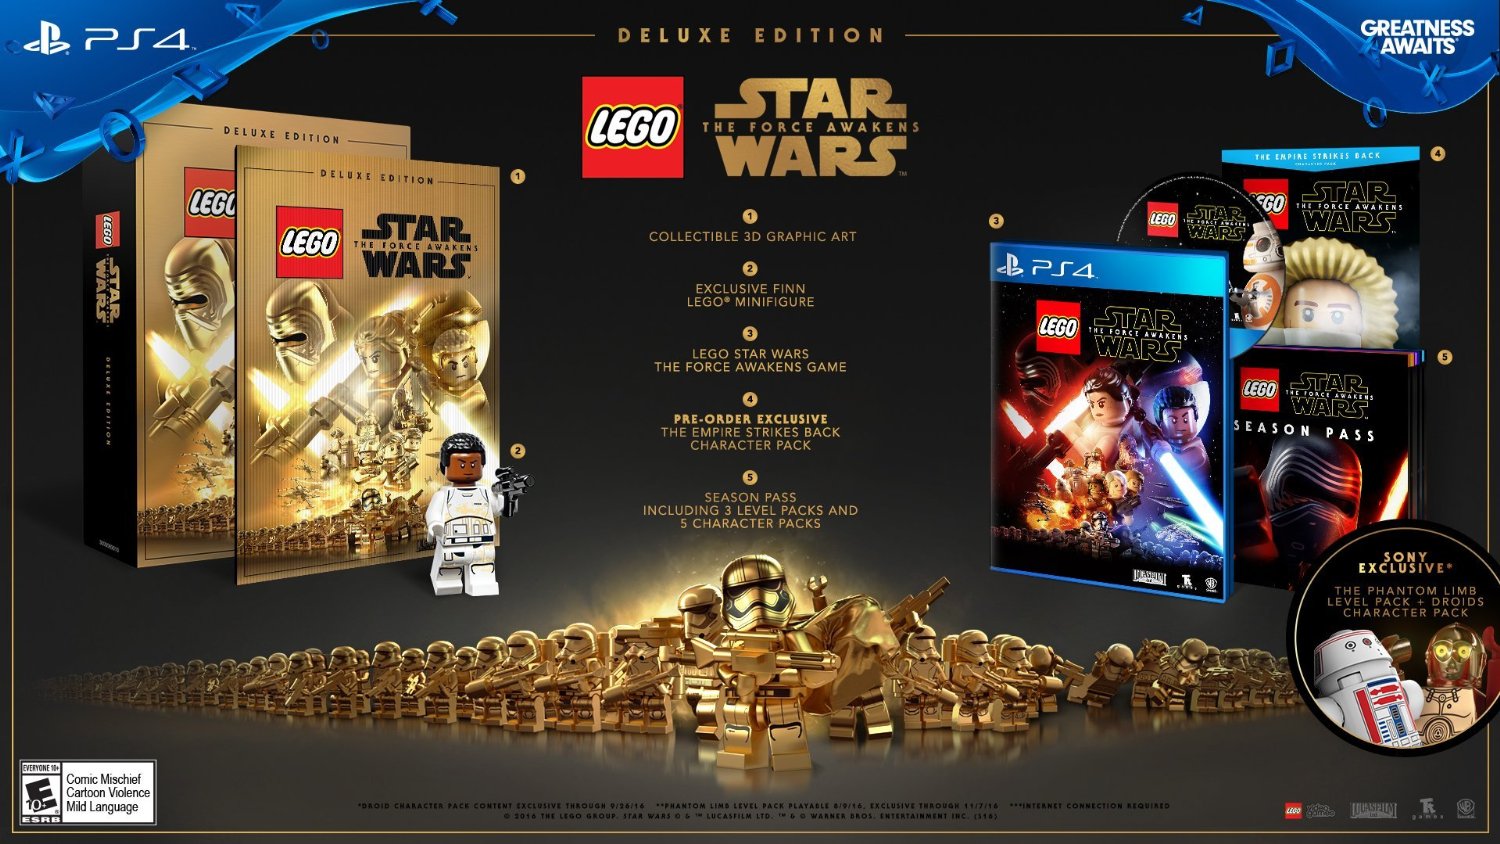 derefter mørkere Maiden LEGO Star Wars The Force Awakens Demo Now Available for Playstation 4 - FBTB